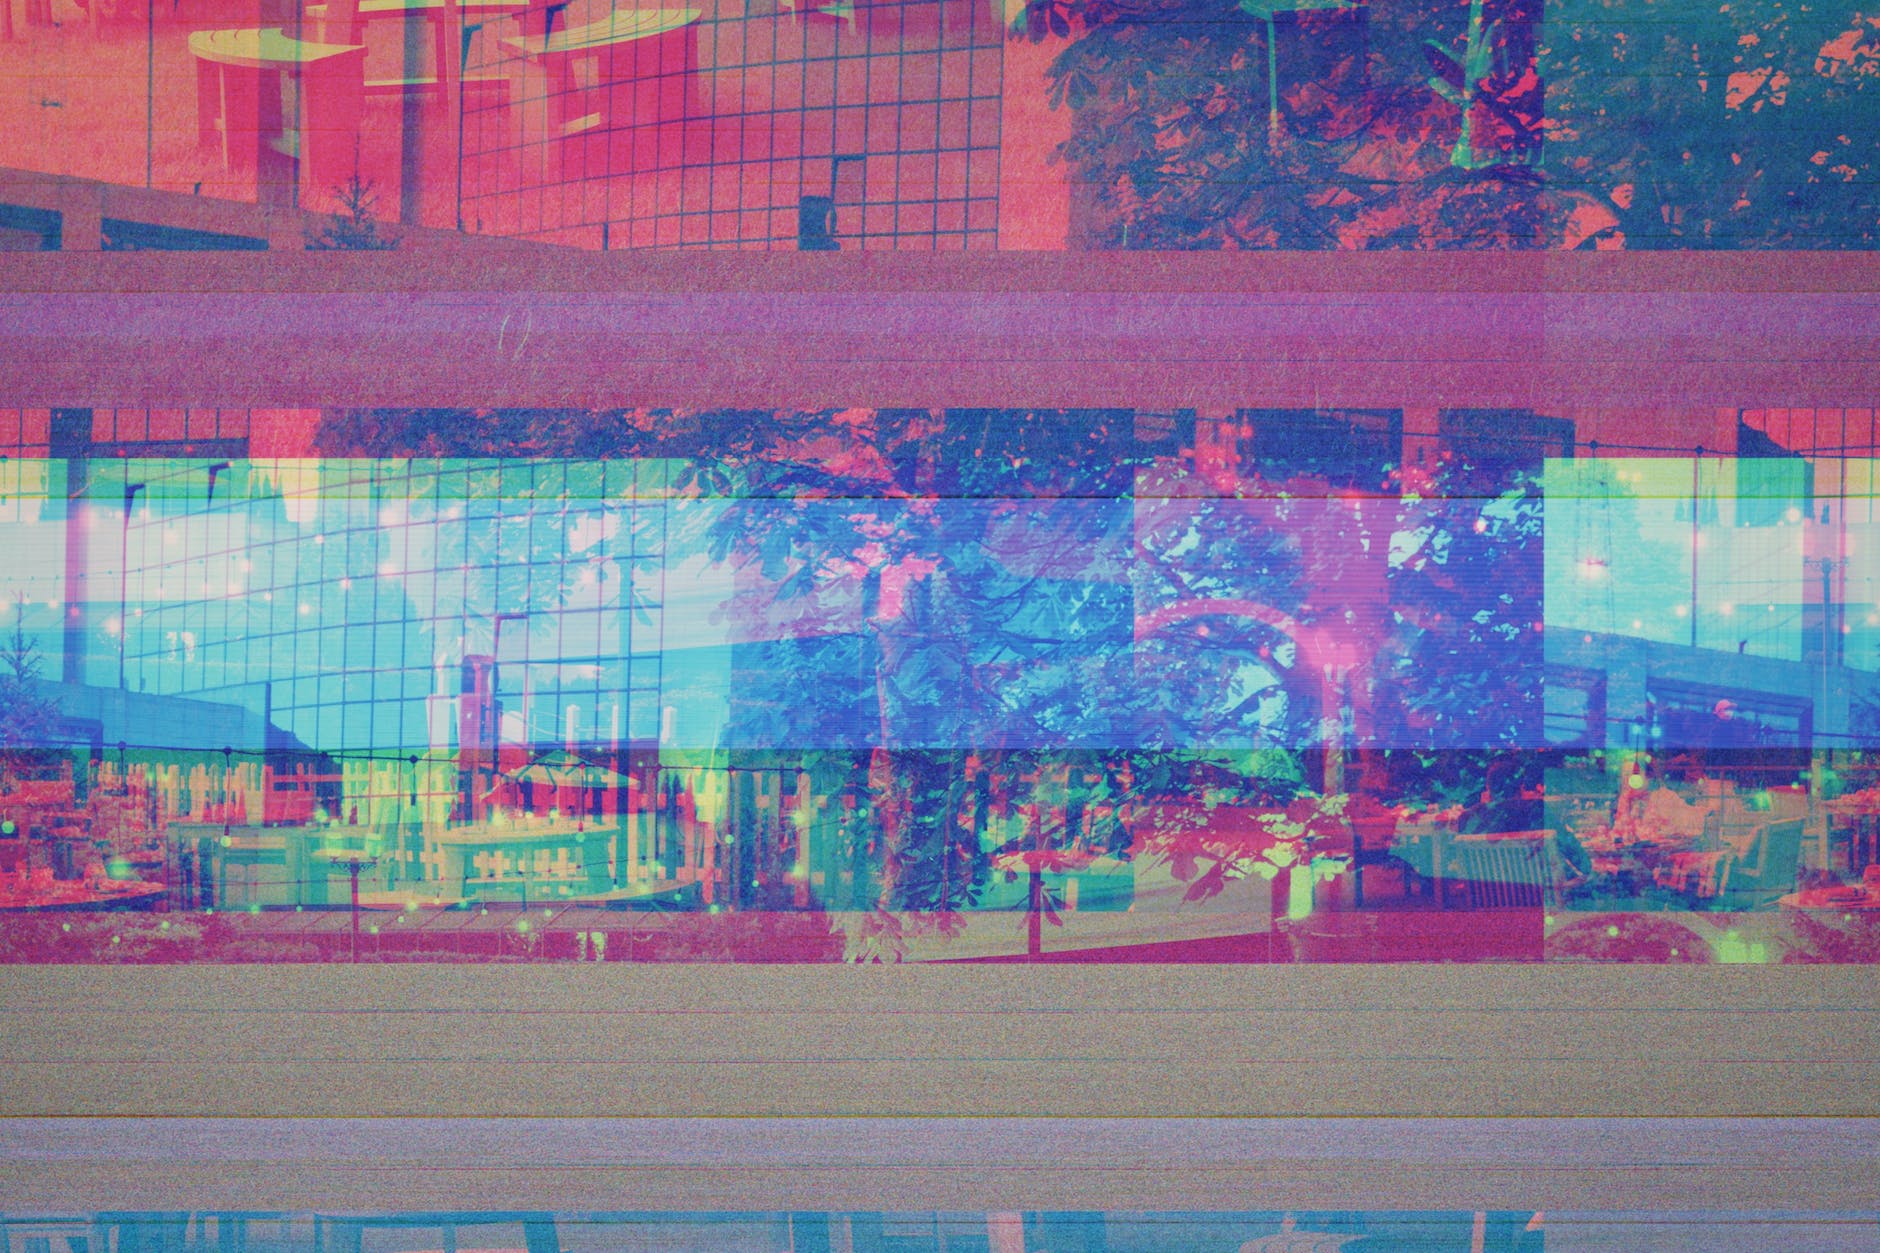 glitched photo of street in city